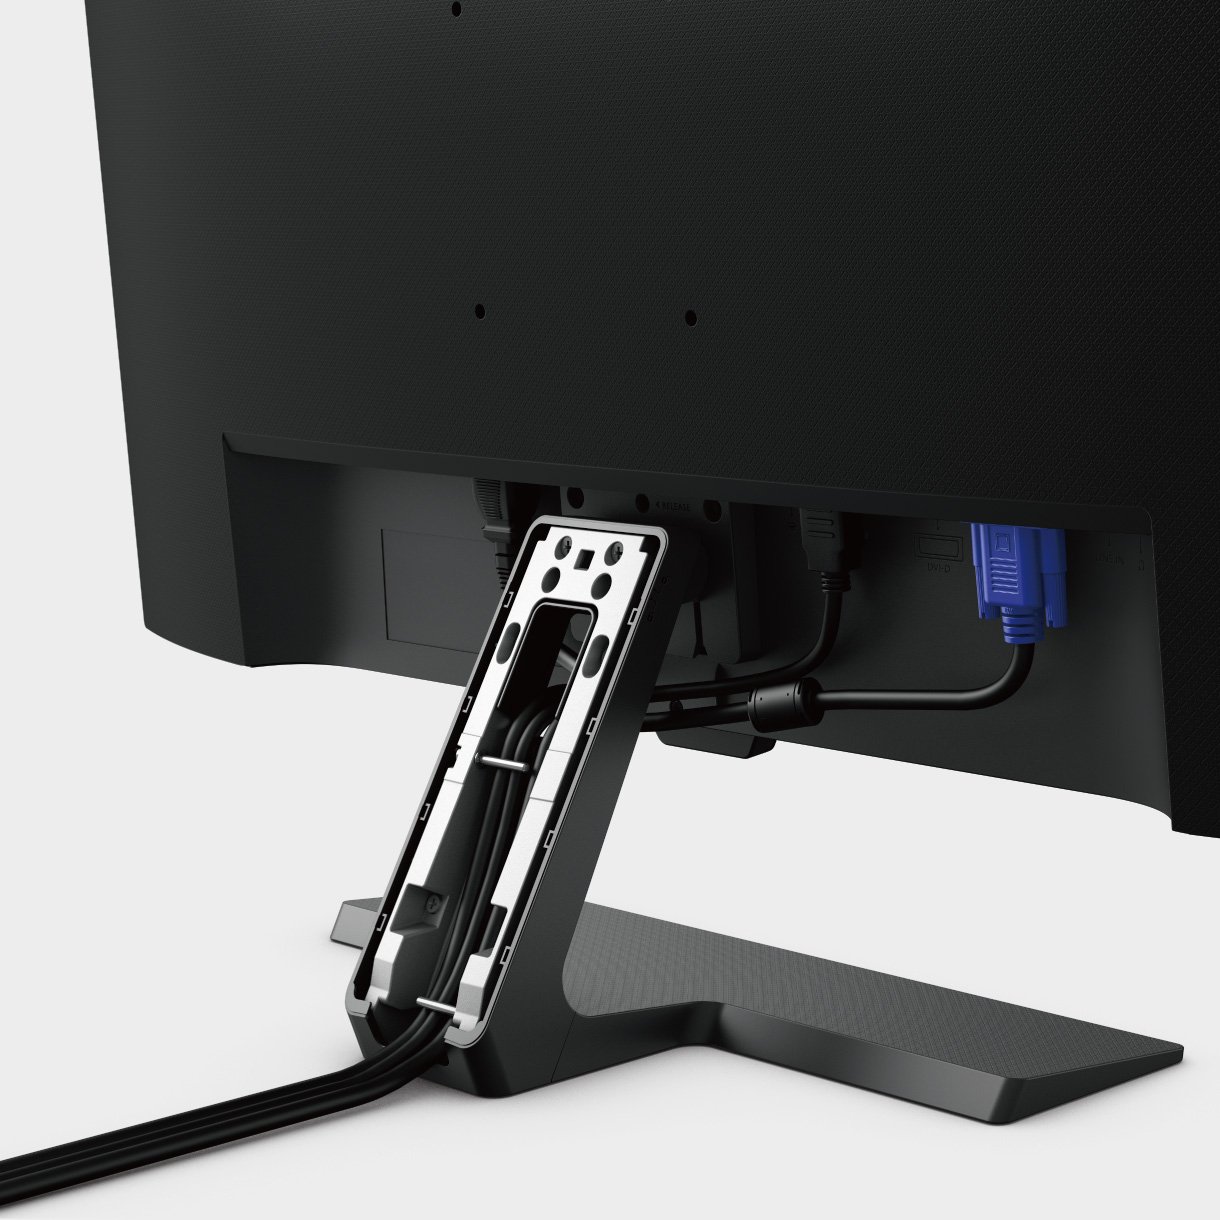 benq gl2780 with invisible cable management system hides all wires inside the monitor stand for cleanest look